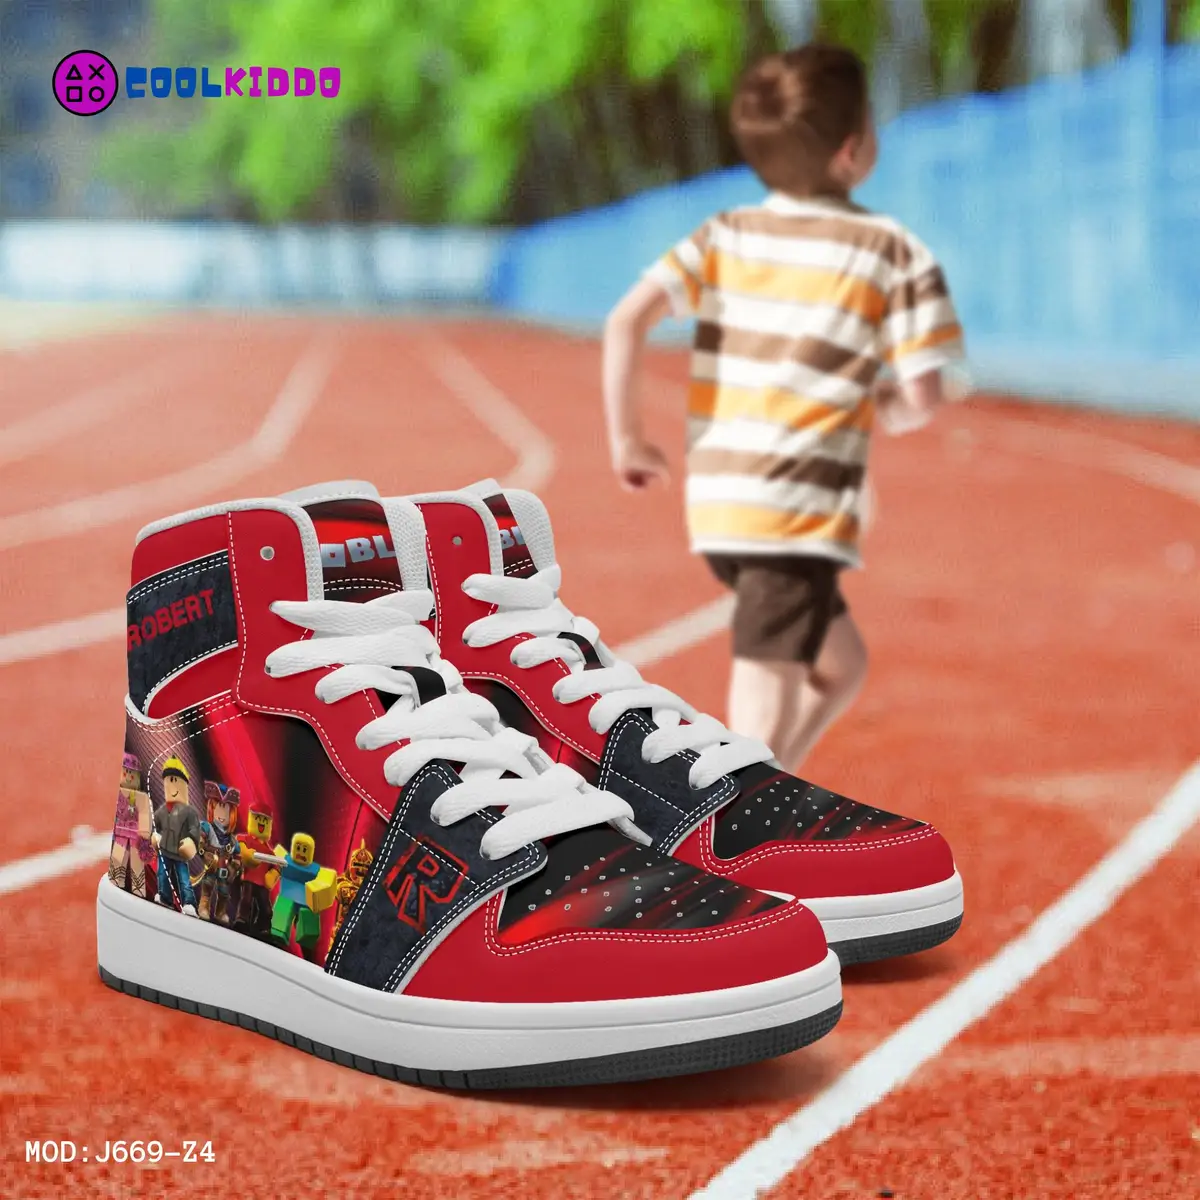 Personalized Name ROBLOX Characters High-Top Leather Black and Red Shoes, Jordans Style Sneakers Cool Kiddo 16